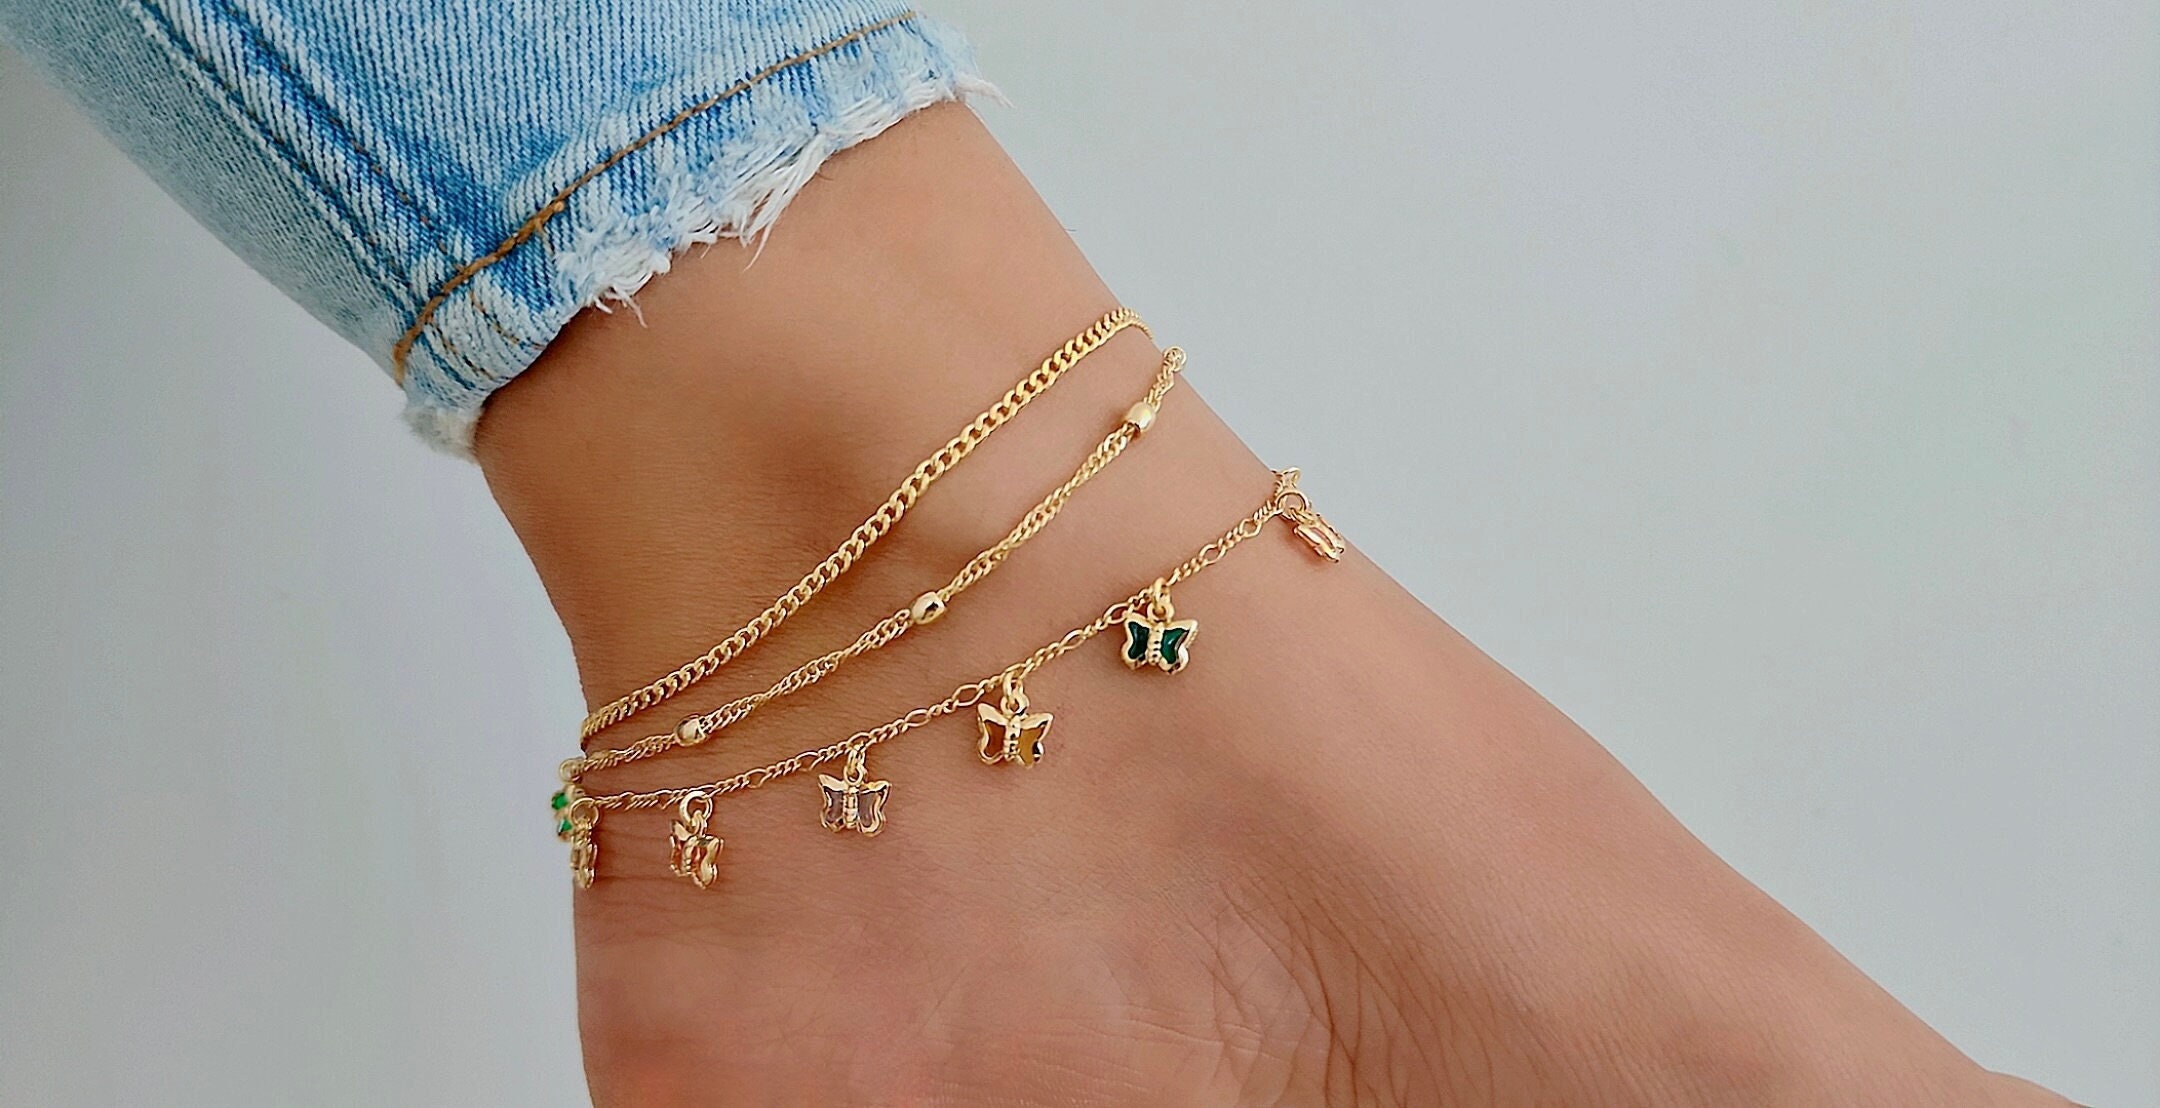 Rikelus 14K Gold Anklets for Women Real Gold, Flower Ankle Bracelet Ankle  Jewelry Birthday/Christmas Gift for Wife Girlfriend Her 8''+2